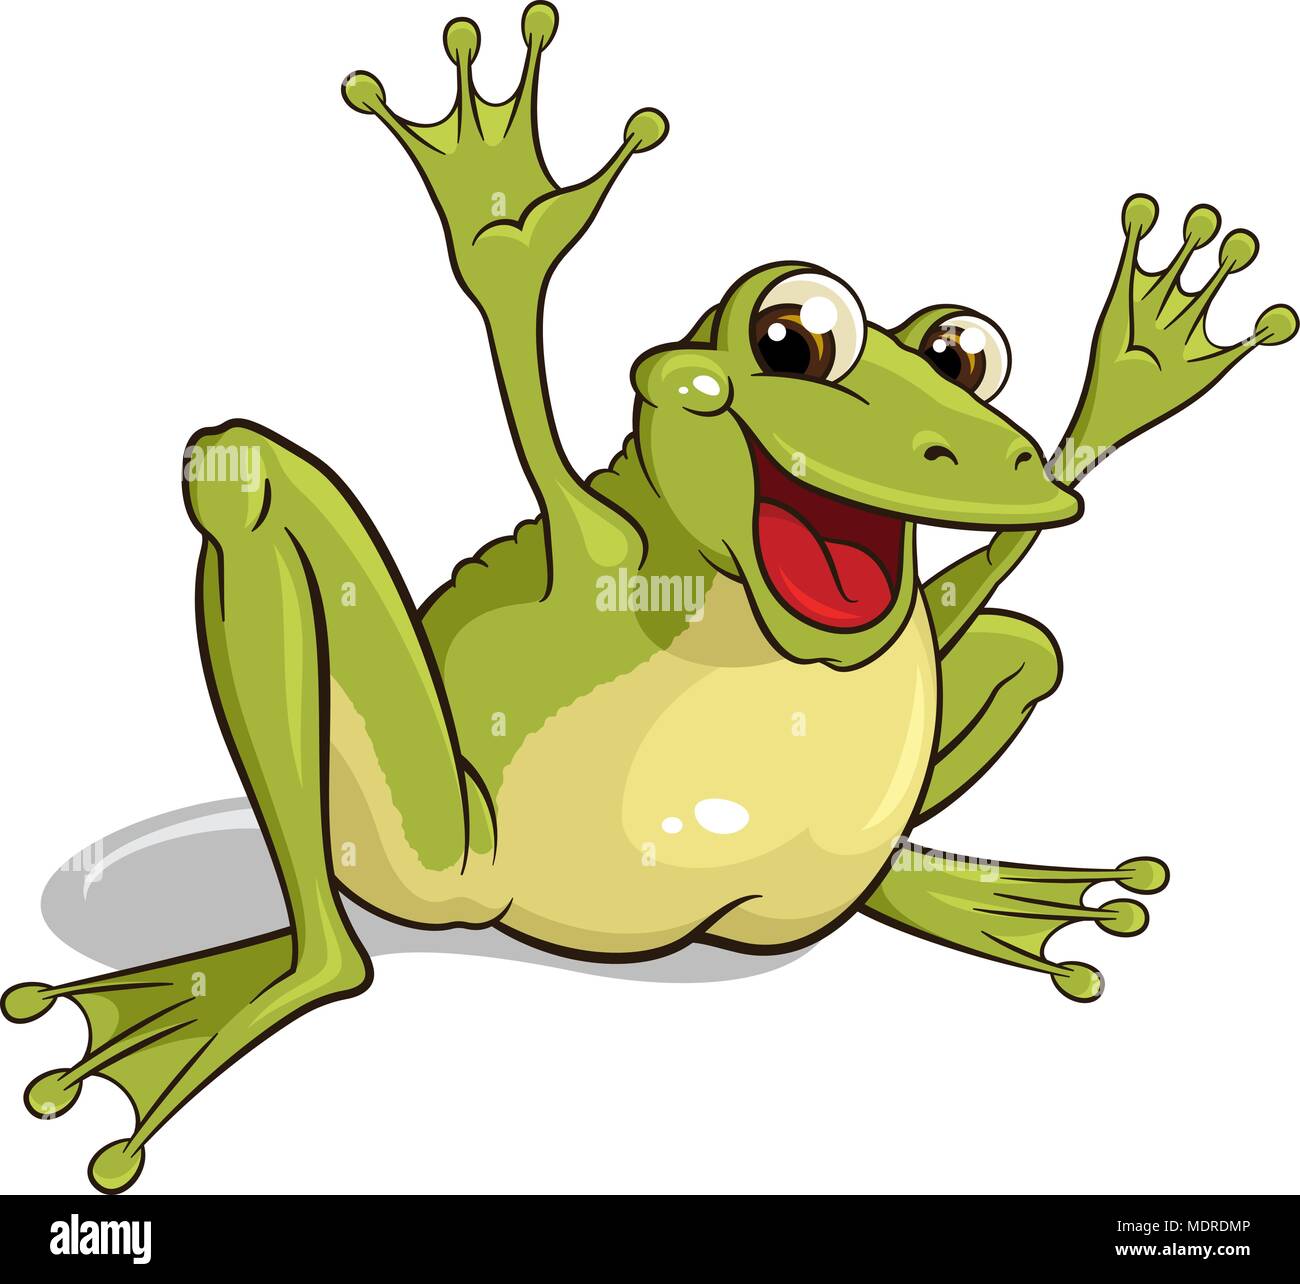 Funny frog isolated on white. This vector illustration can be used as a print on kid's T-shirt or other uses Stock Vector